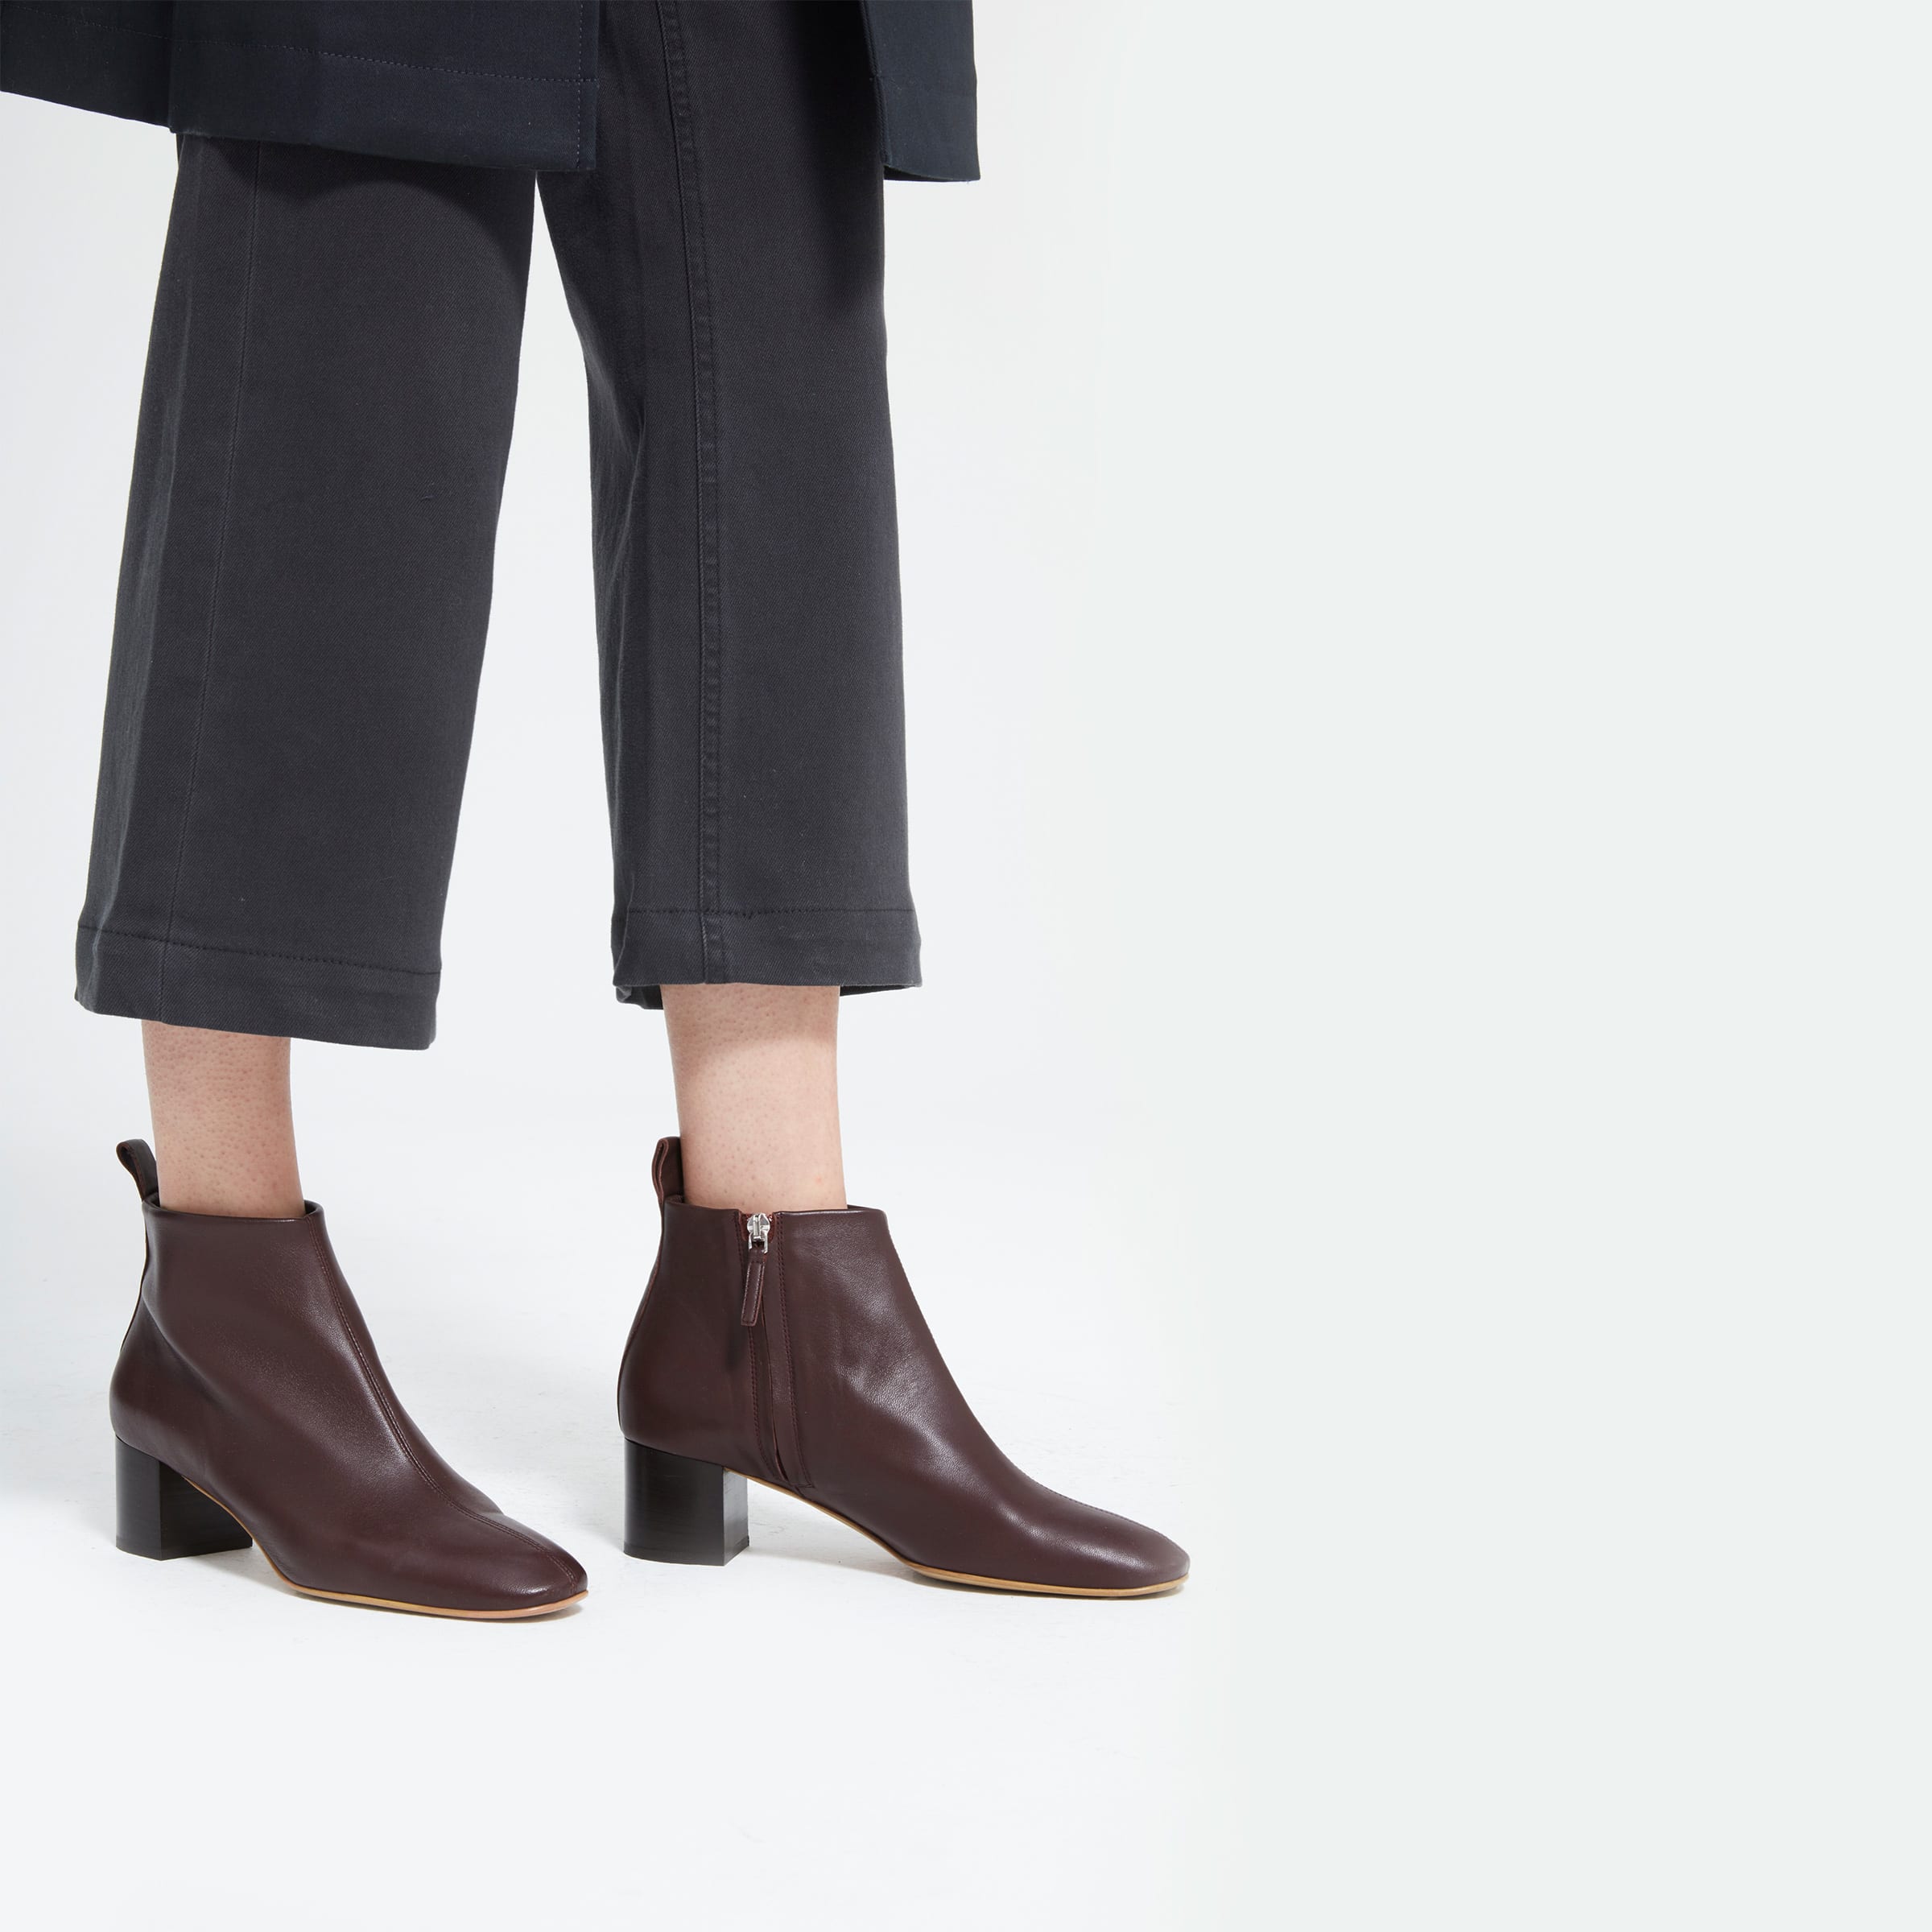 The Day Boot – Everlane